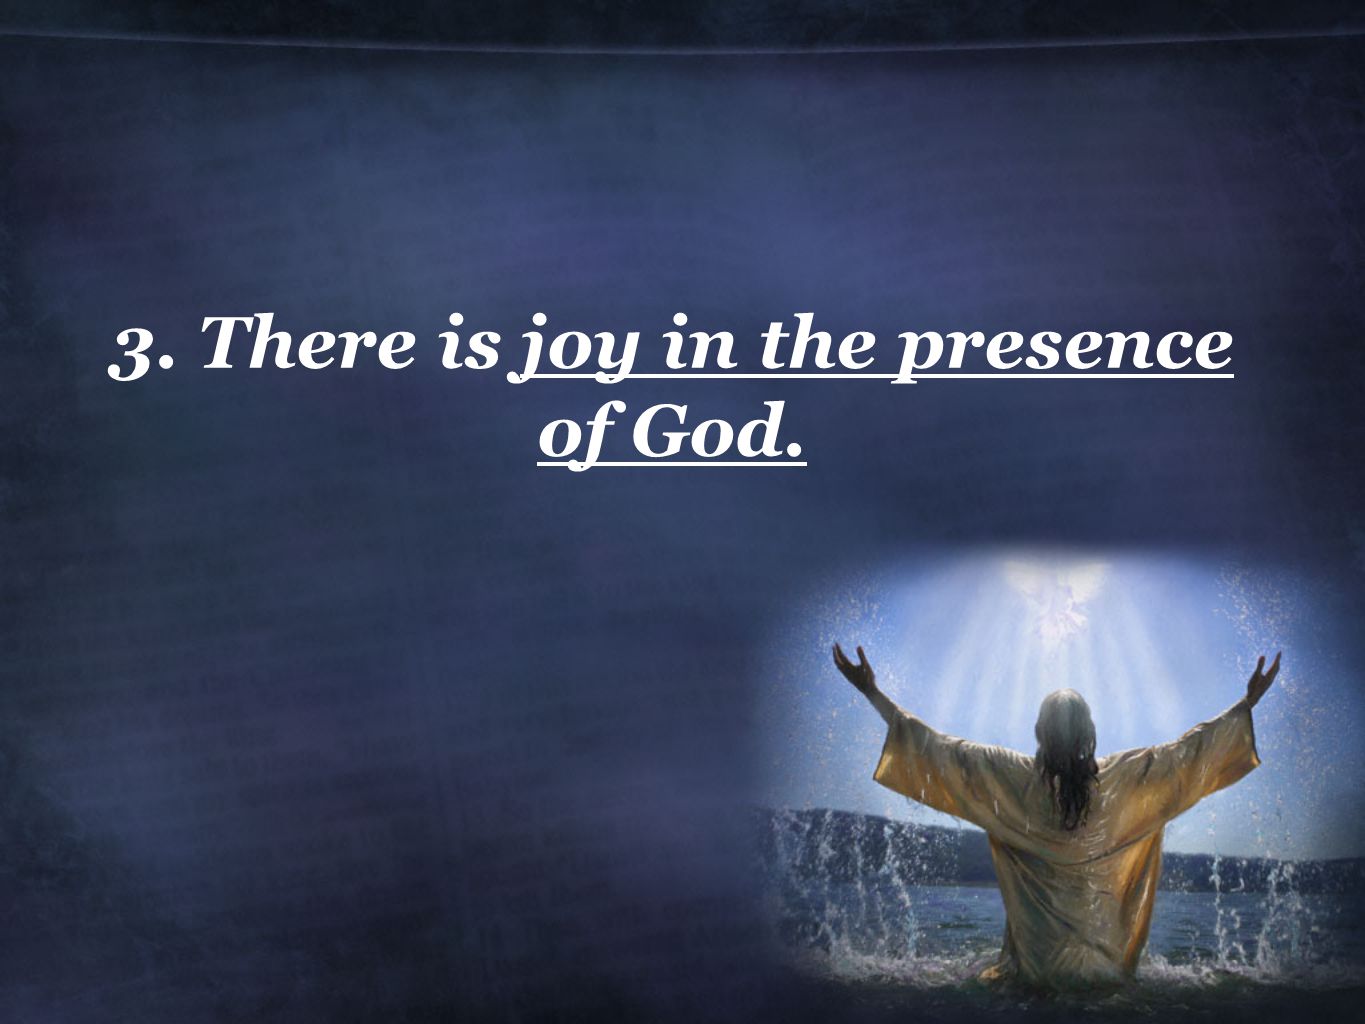 3. There is joy in the presence of God.